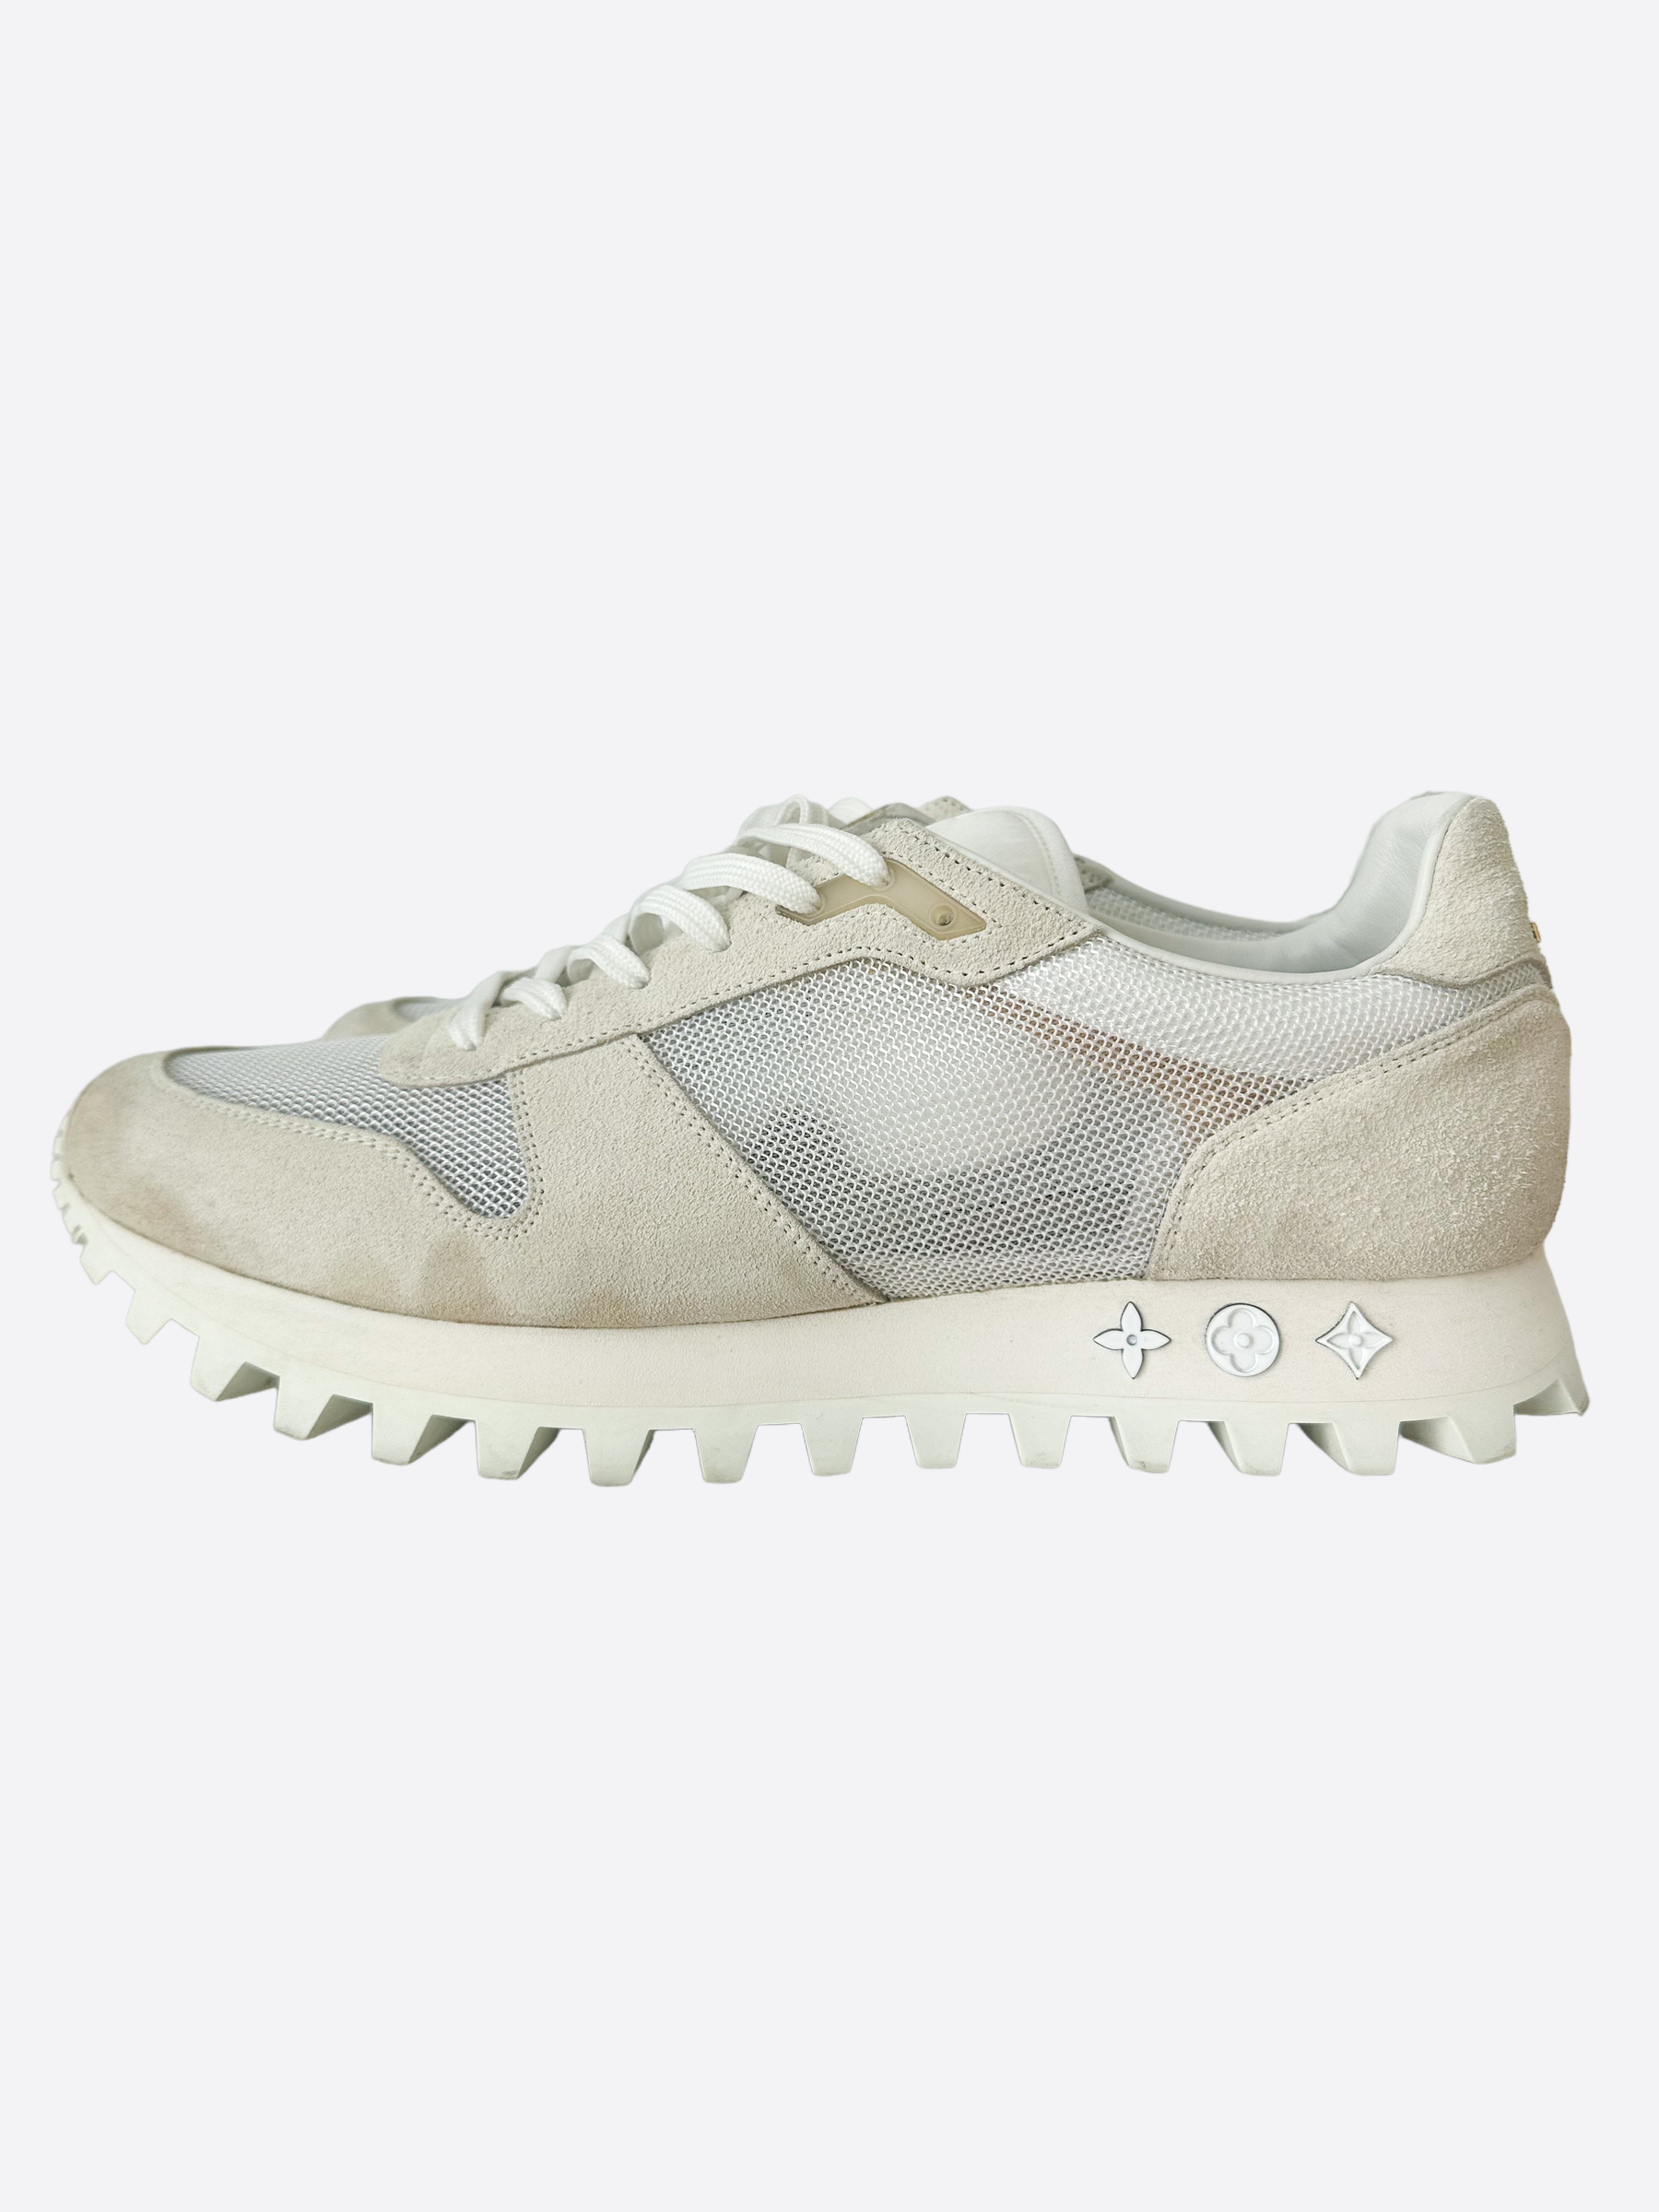 Louis Vuitton New Runners Sneakers